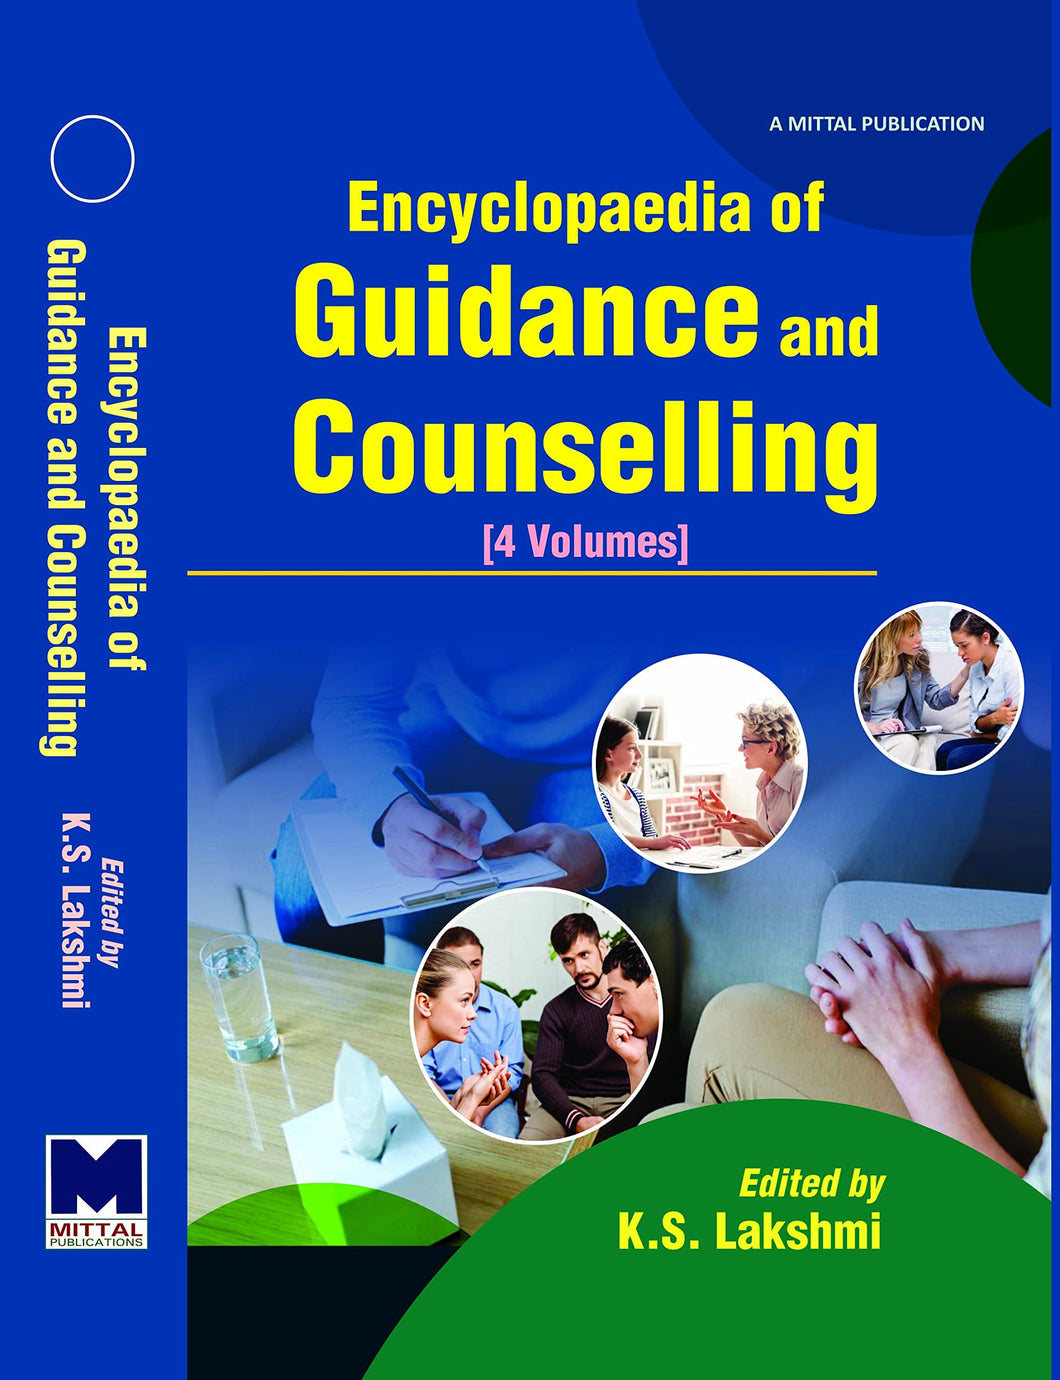 Encyclopaedia of Guidance and Counselling (4 Volumes)